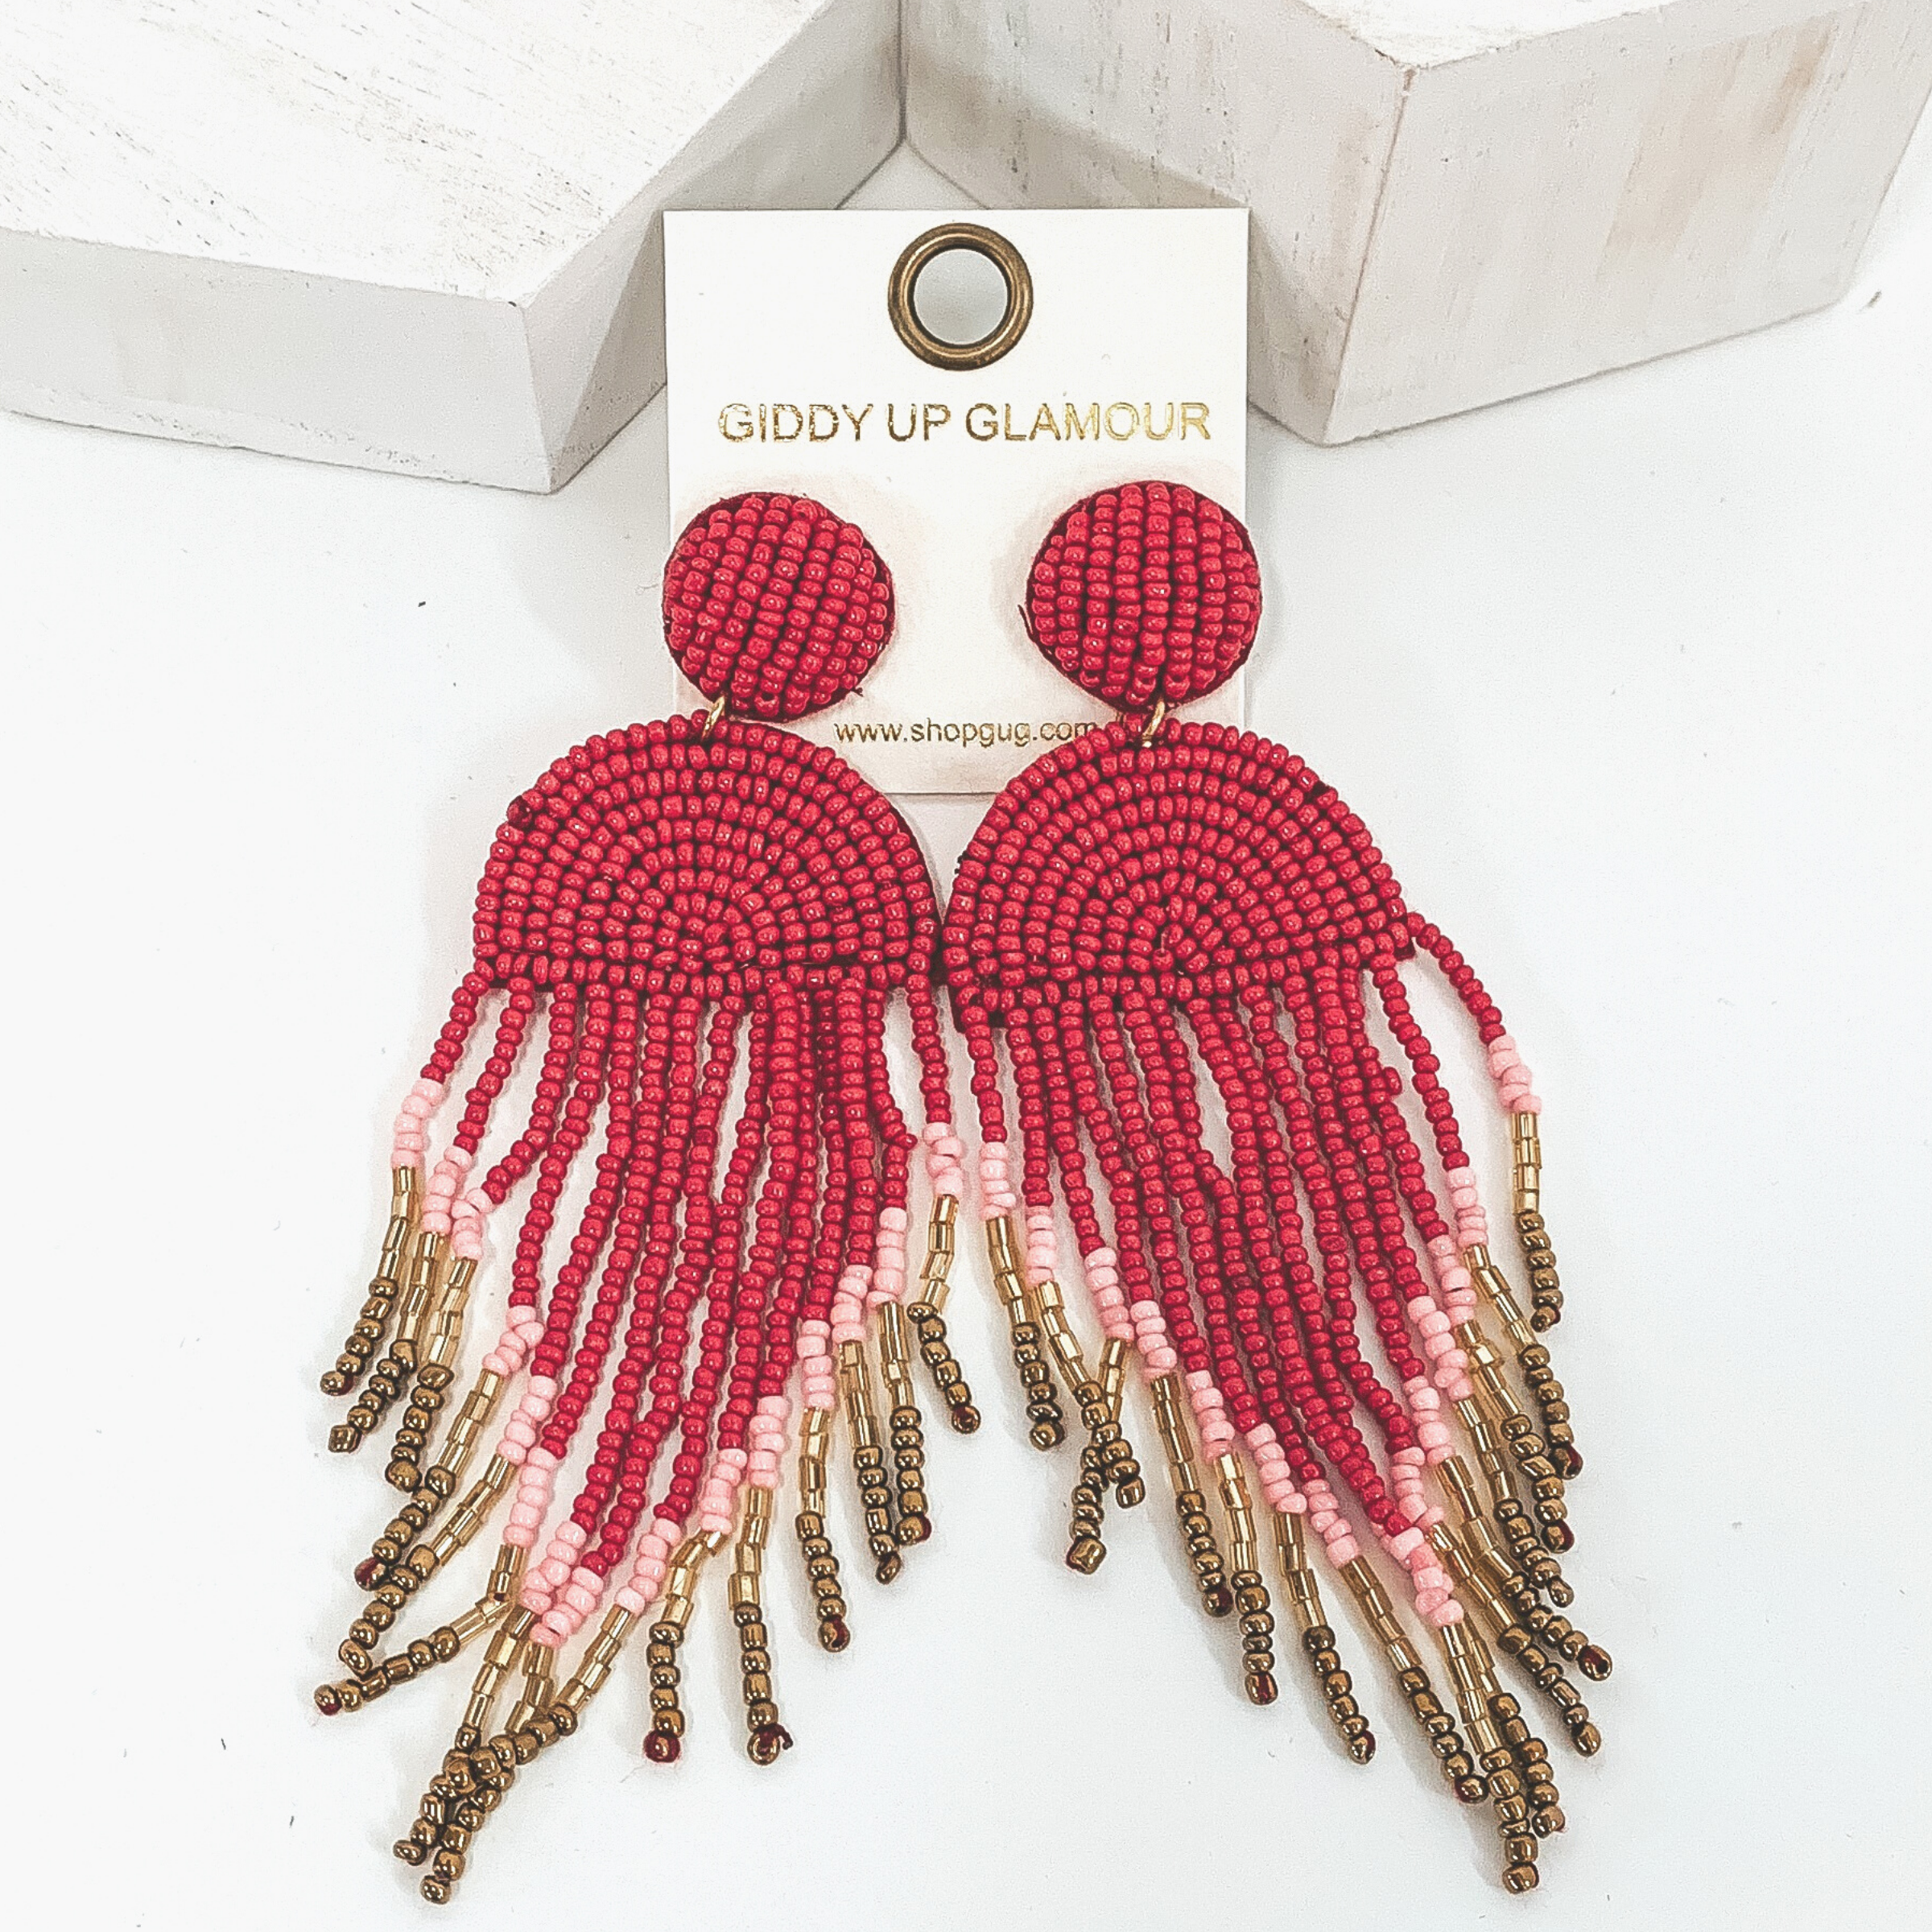 Semi Circle Drop Beaded Earrings with Tassels in Red - Giddy Up Glamour Boutique